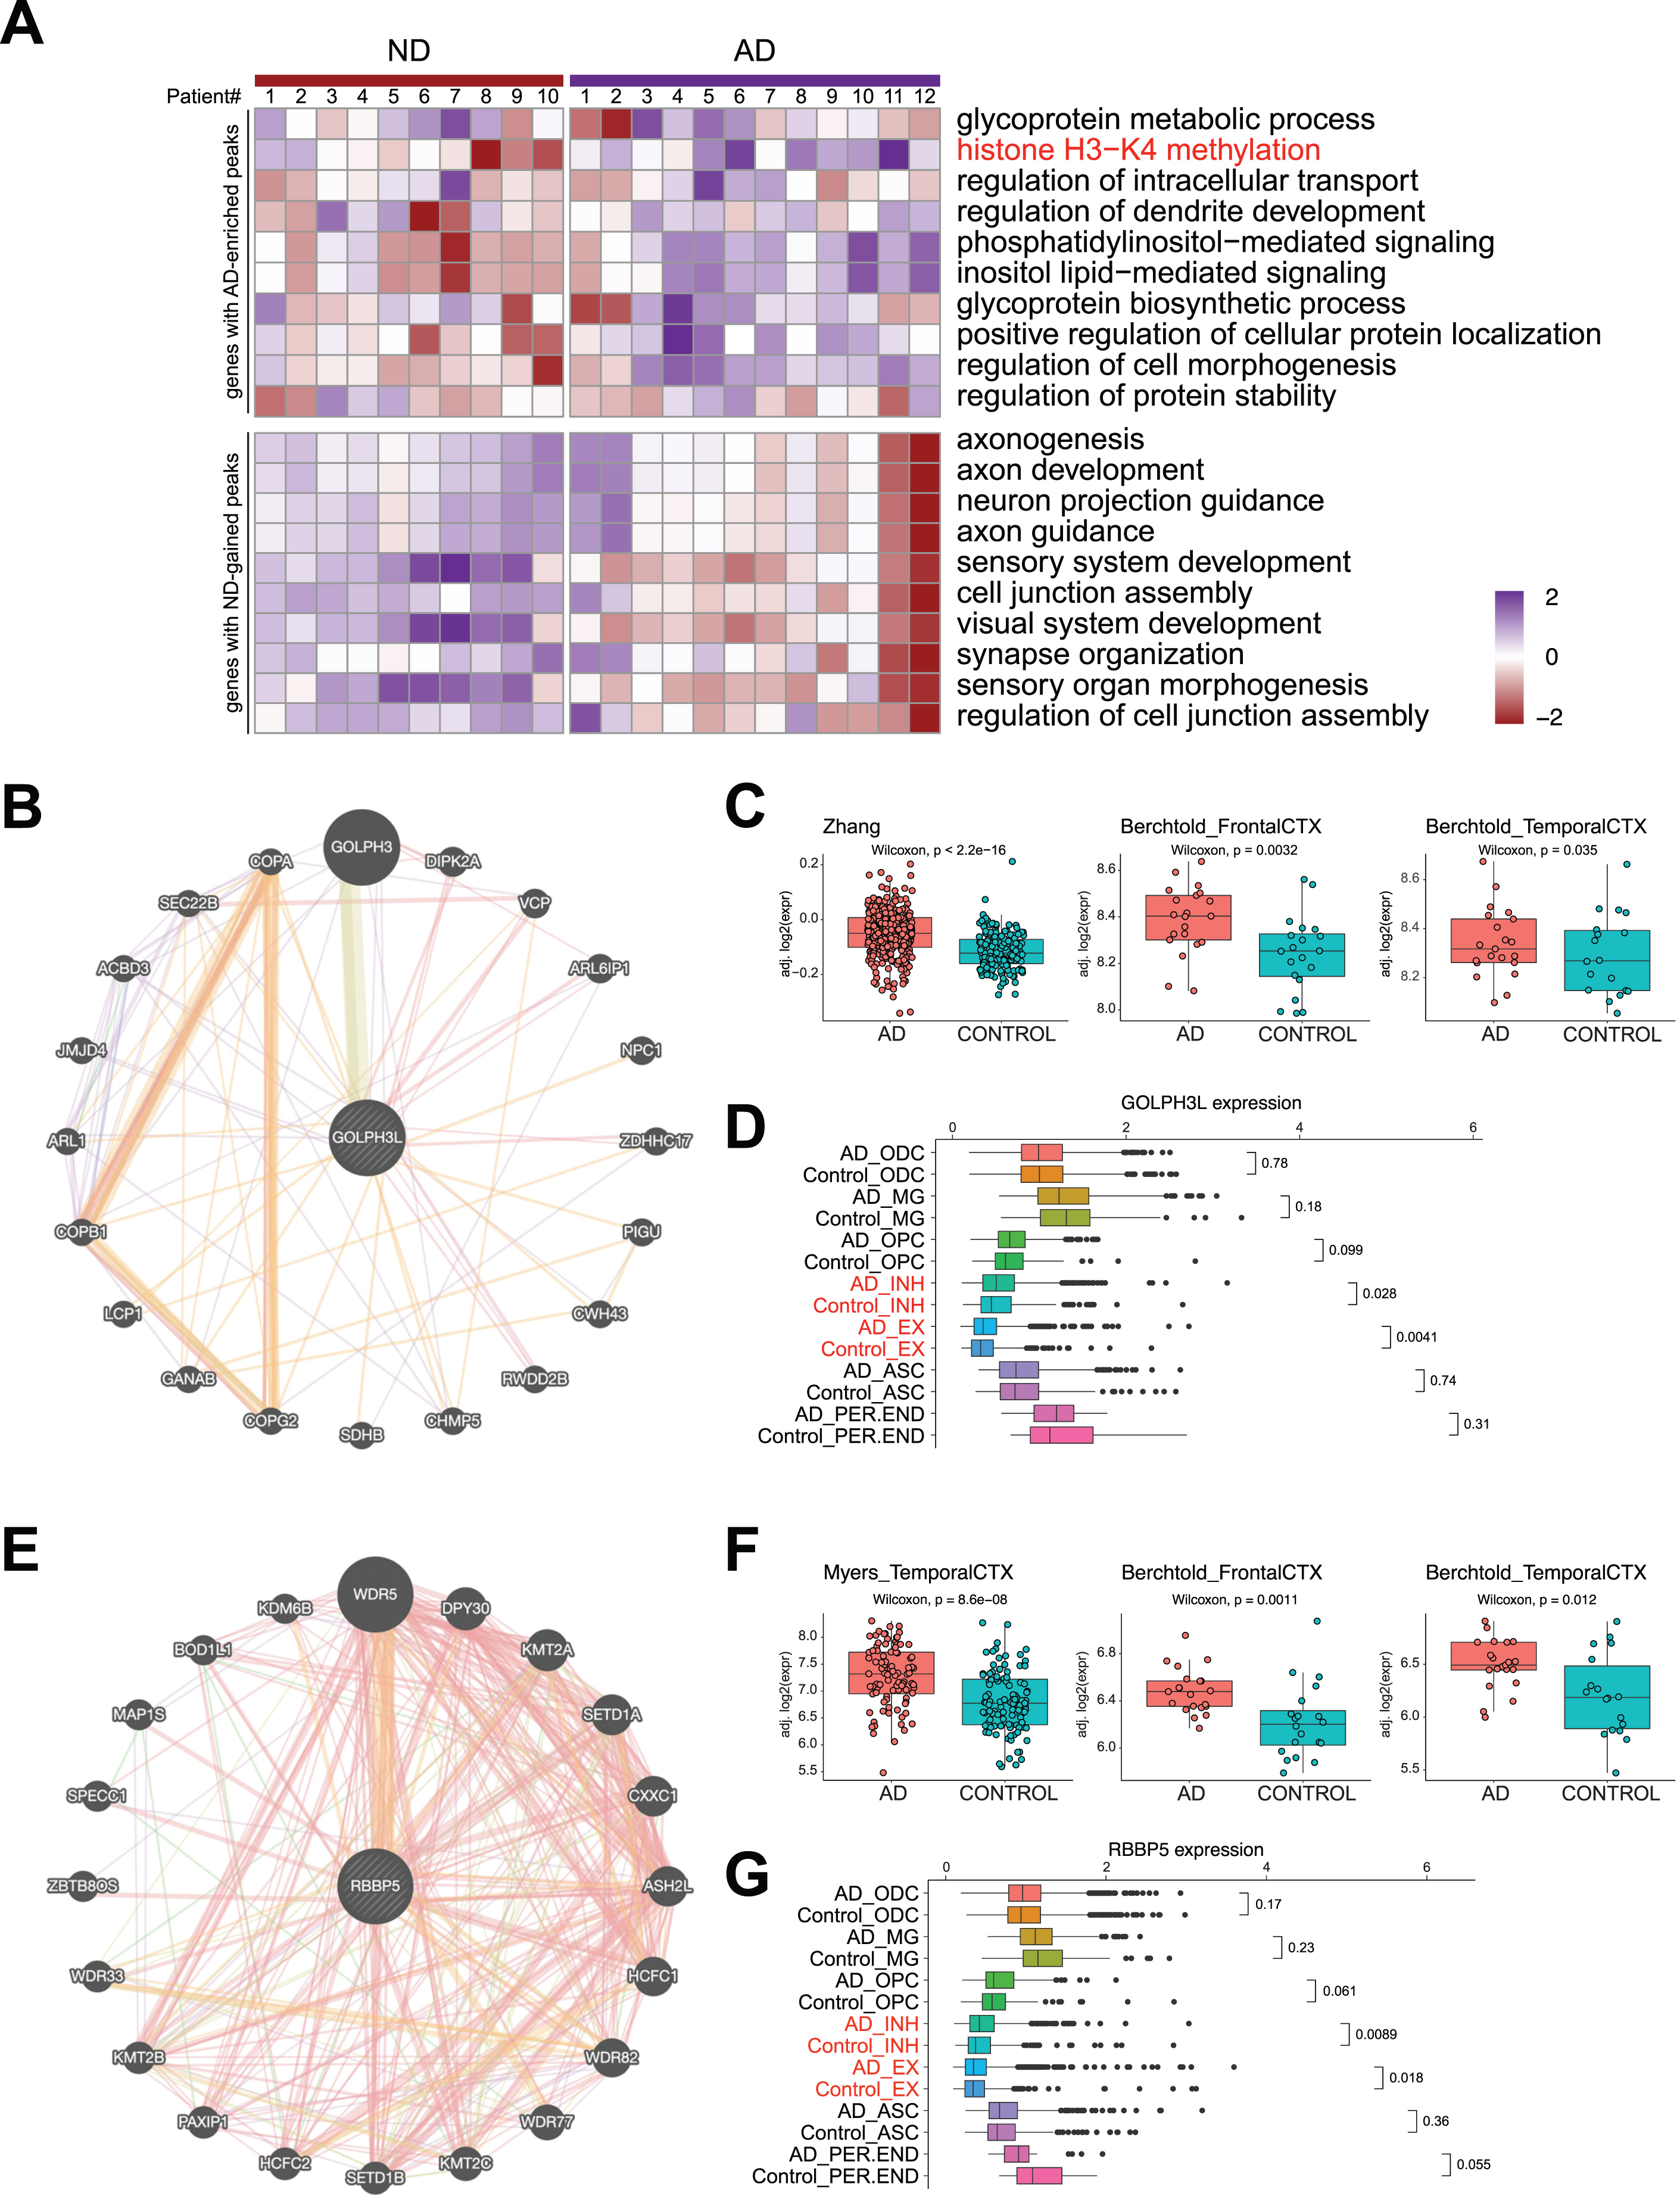 DSBs correlate with aberrant gene expression in AD. A) Heatmap showing AD and ND-associated signature level in AD and ND. B) STRING analysis of glycoprotein metabolic process-related genes revealing a protein interaction network with GOLPH3L. C) Boxplots showing GOLPH3L expression in three published RNA-seq datasets of AD and ND. D) Boxplots showing GOLPH3L expression in single cell RNA-seq datasets of AD and ND. E) STRING analysis of histone H3– K4 methylation-related genes revealing a protein interaction network with RBBP5. F) Boxplots showing RBBP5 expression in three published RNA-seq datasets of AD and ND. G) Boxplots showing RBBP5 expression in single cell RNA-seq datasets of AD and ND.